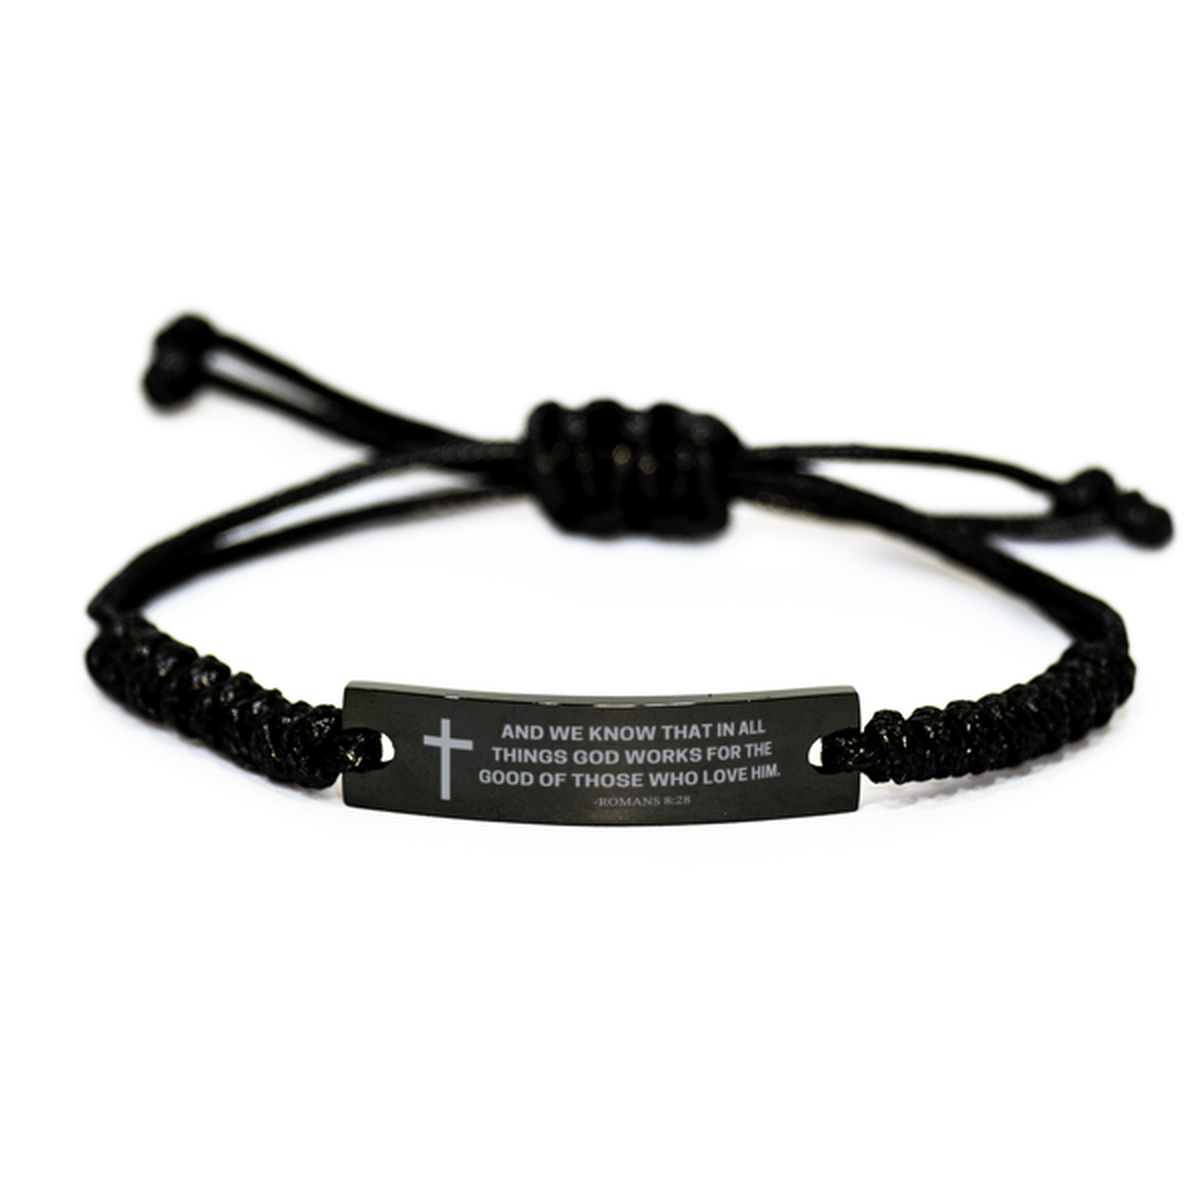 Baptism Gifts For Teenage Boys Girls, Christian Bible Verse Black Rope Bracelet, And we know that in all things, Catholic Confirmation Gifts for Son, Godson, Grandson, Nephew